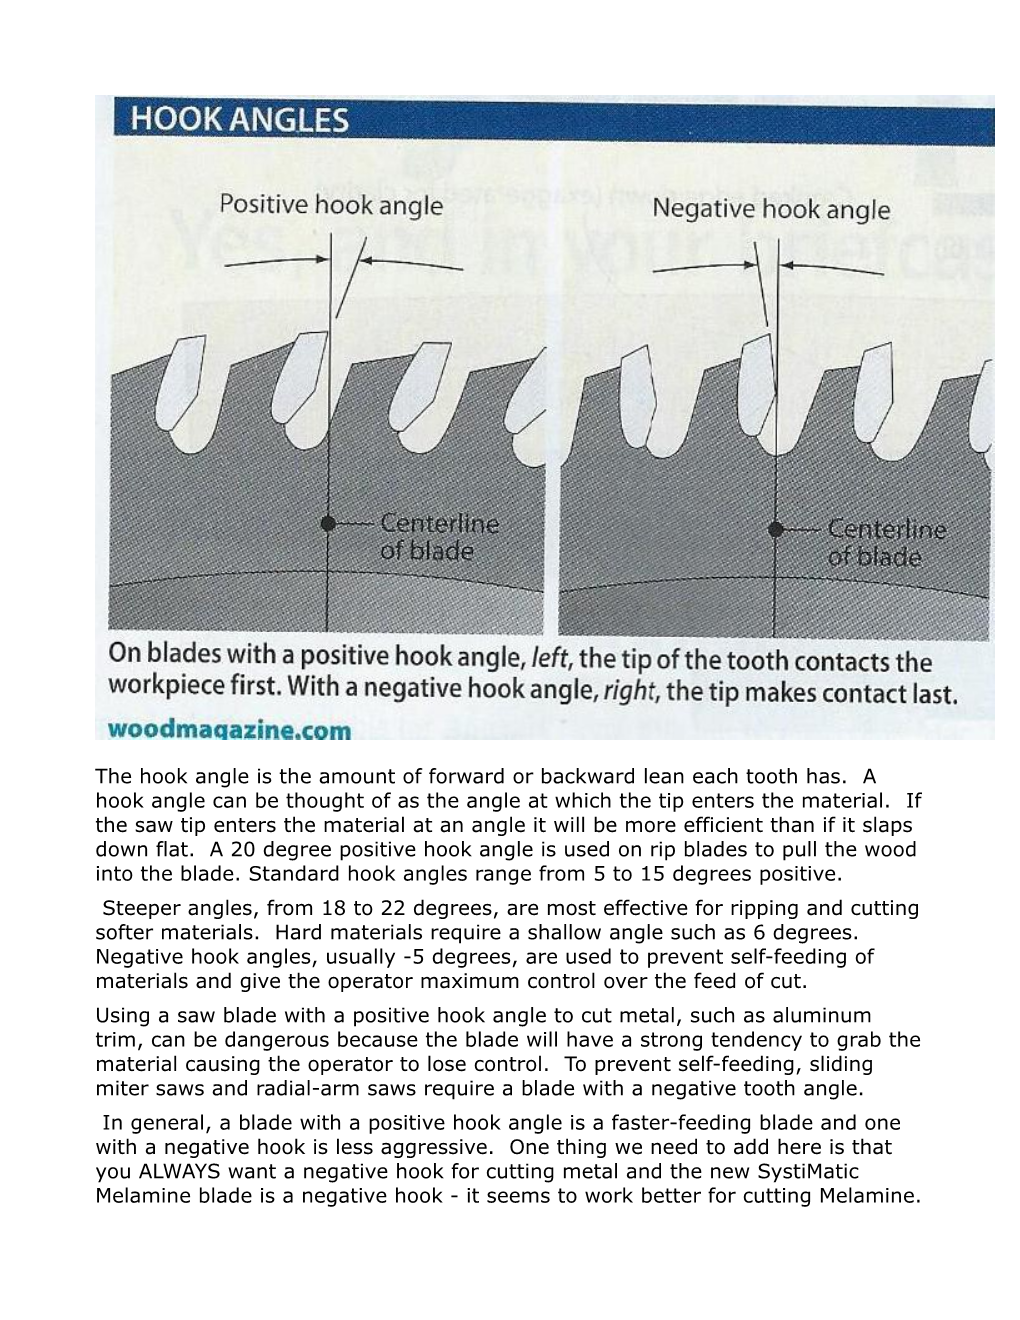 The Hook Angle Is the Amount of Forward Or Backward Lean Each Tooth Has